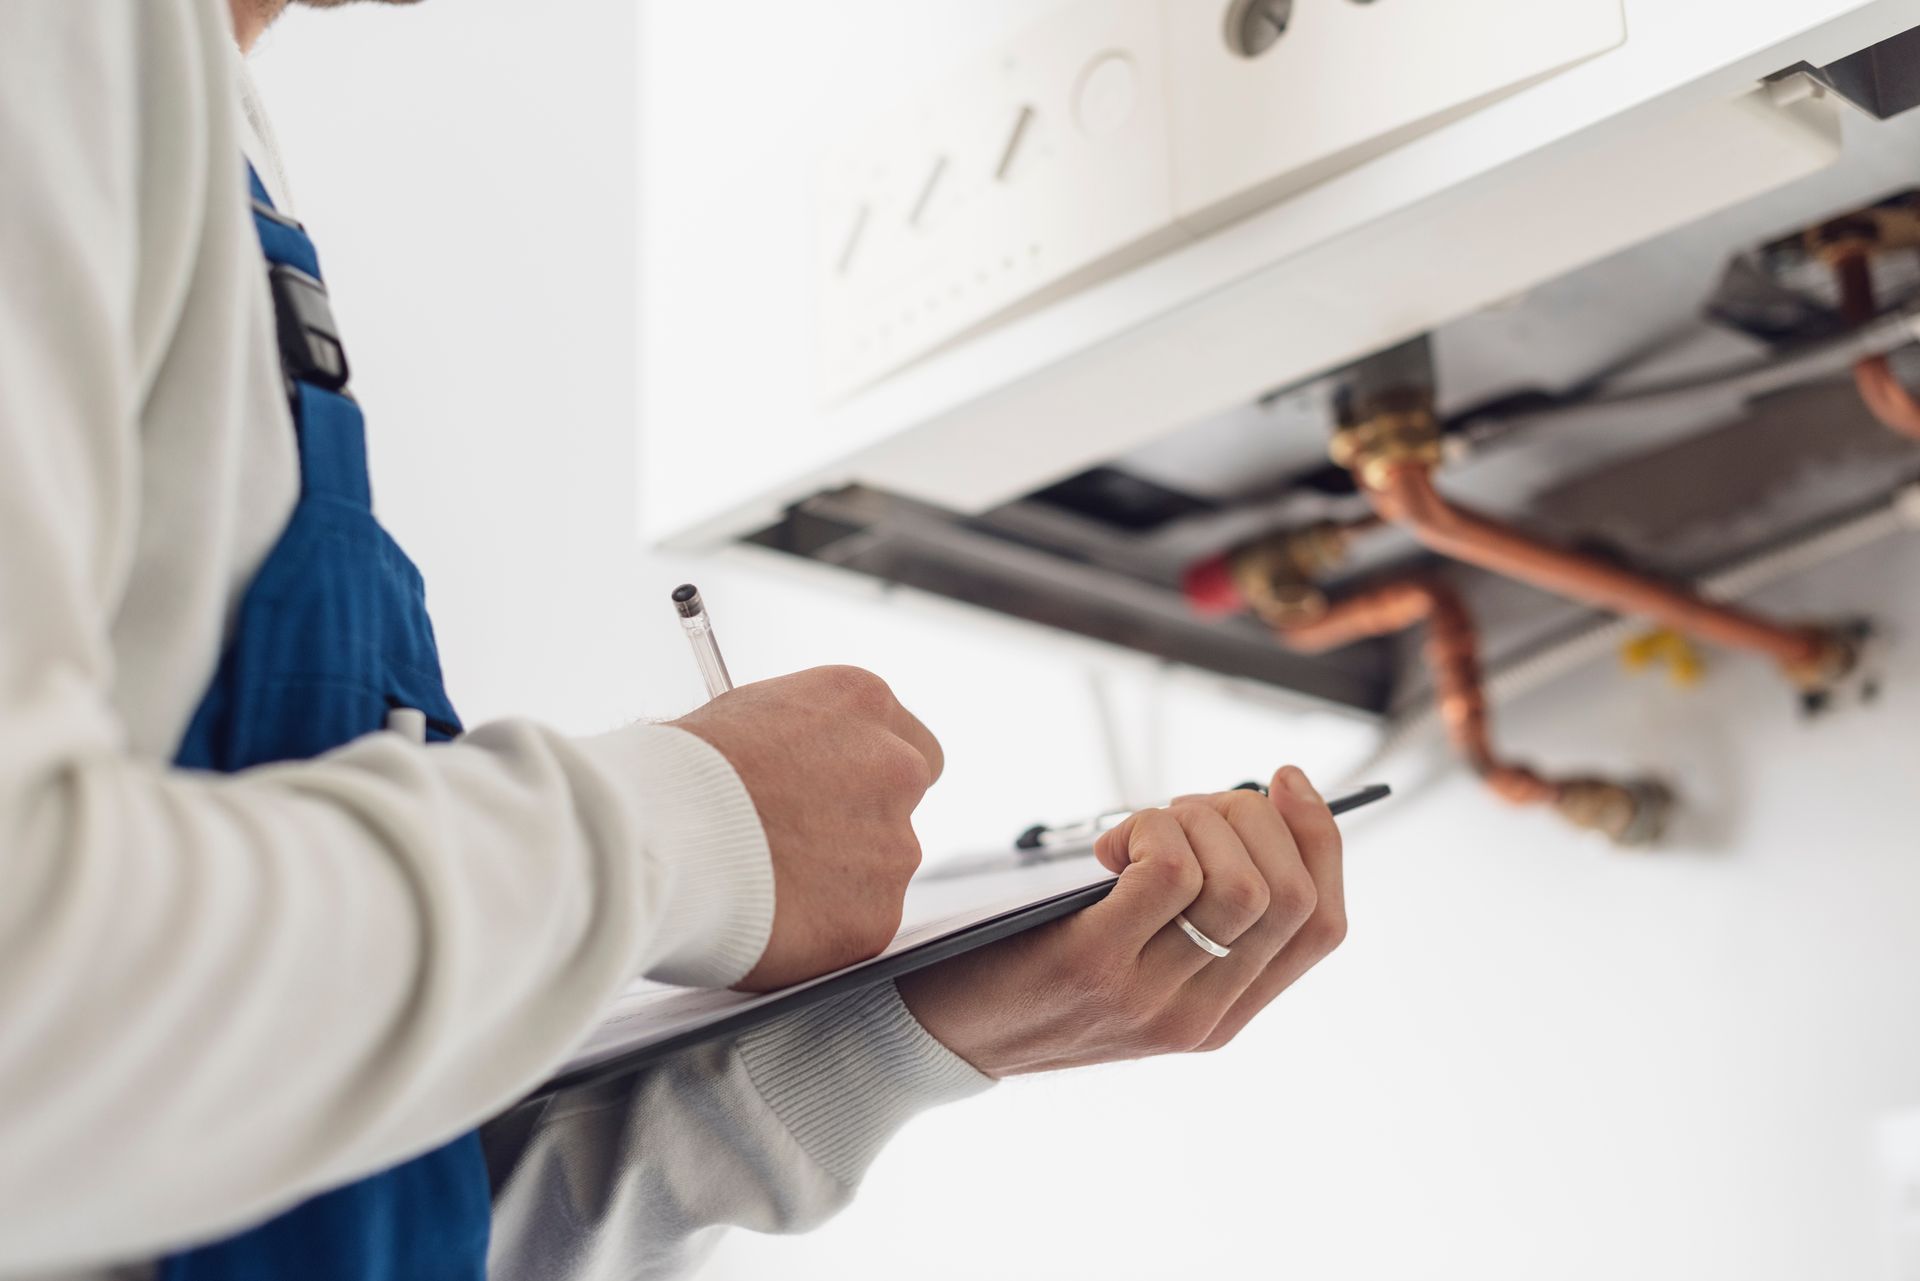 can I install a boiler on my own?